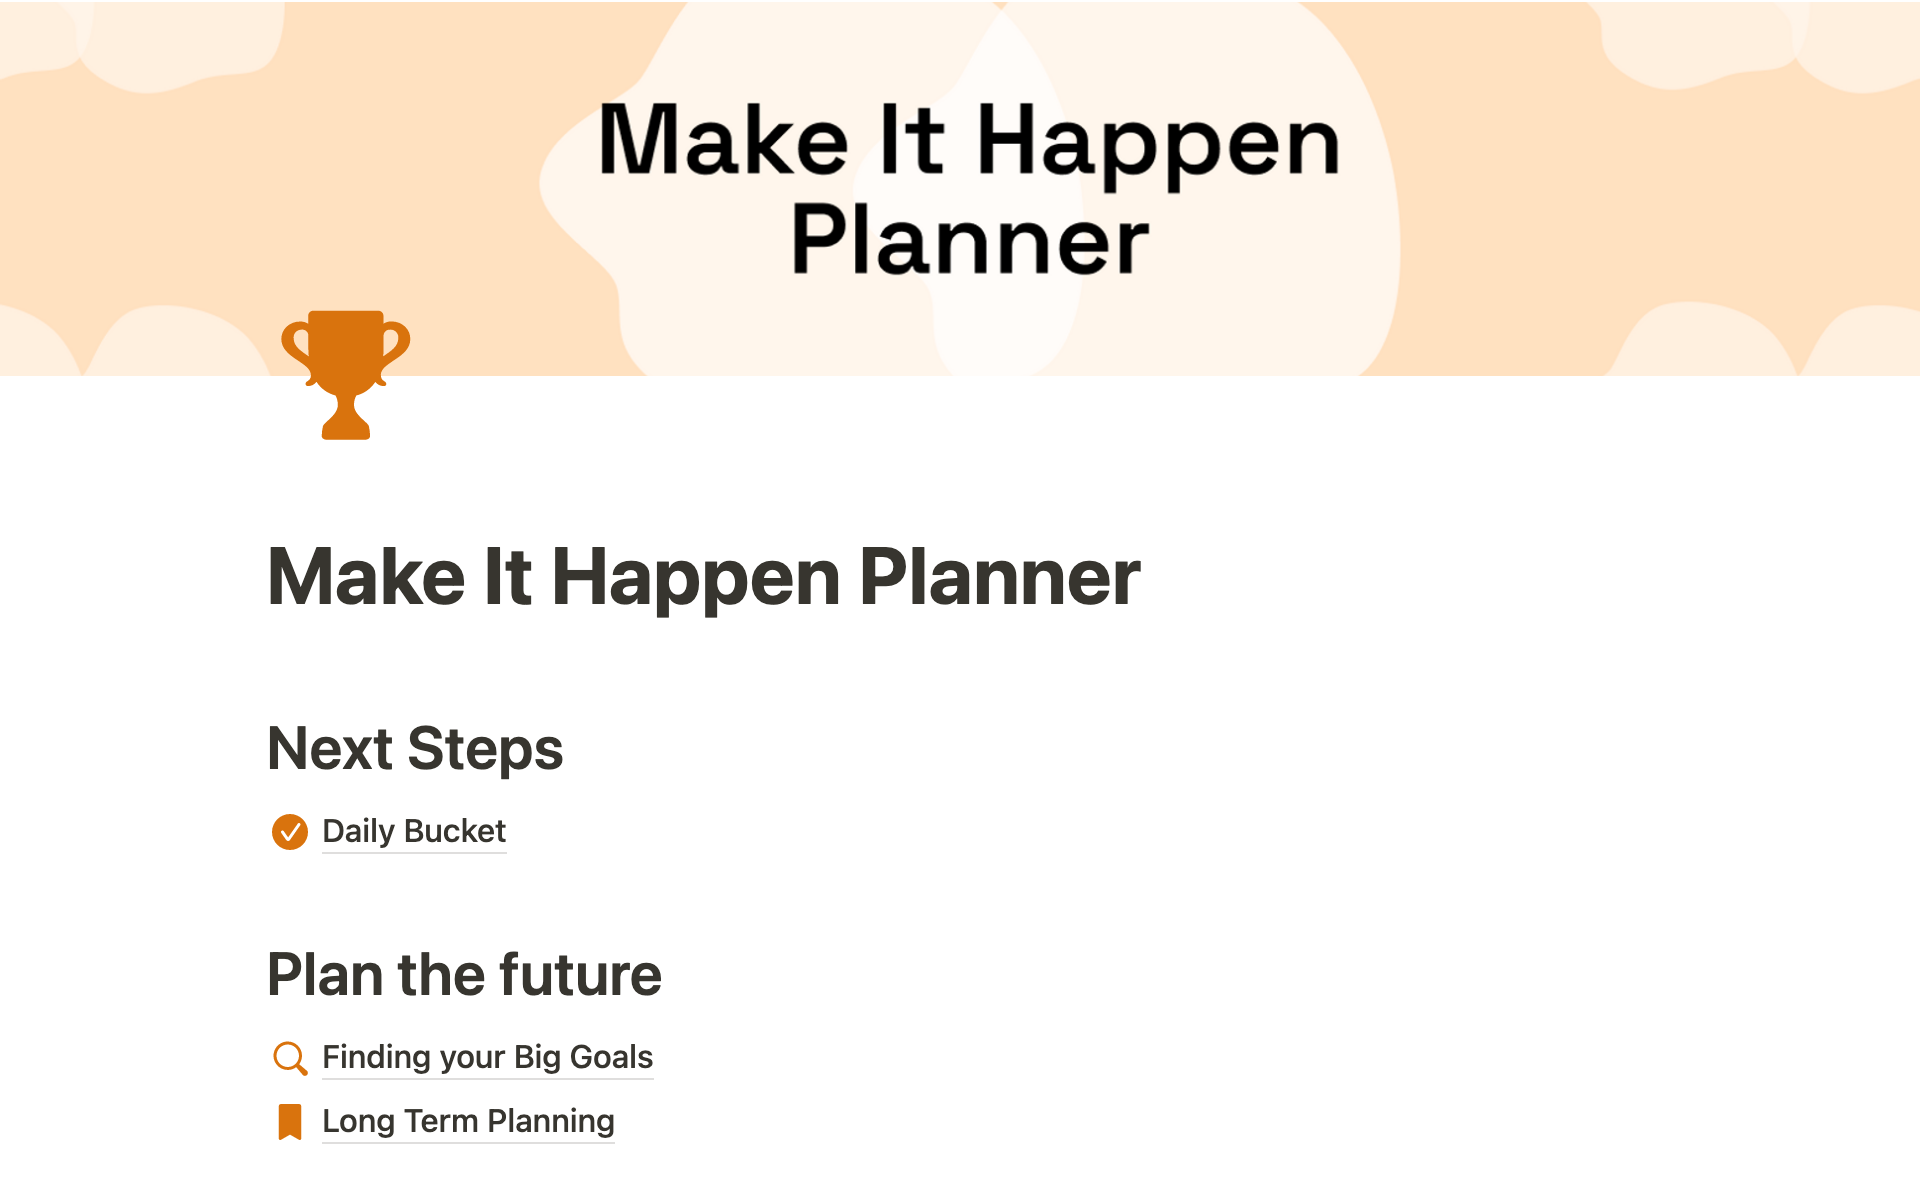 Planner helps organize daily tasks, identify long-term goals, and create a plan to achieve them.